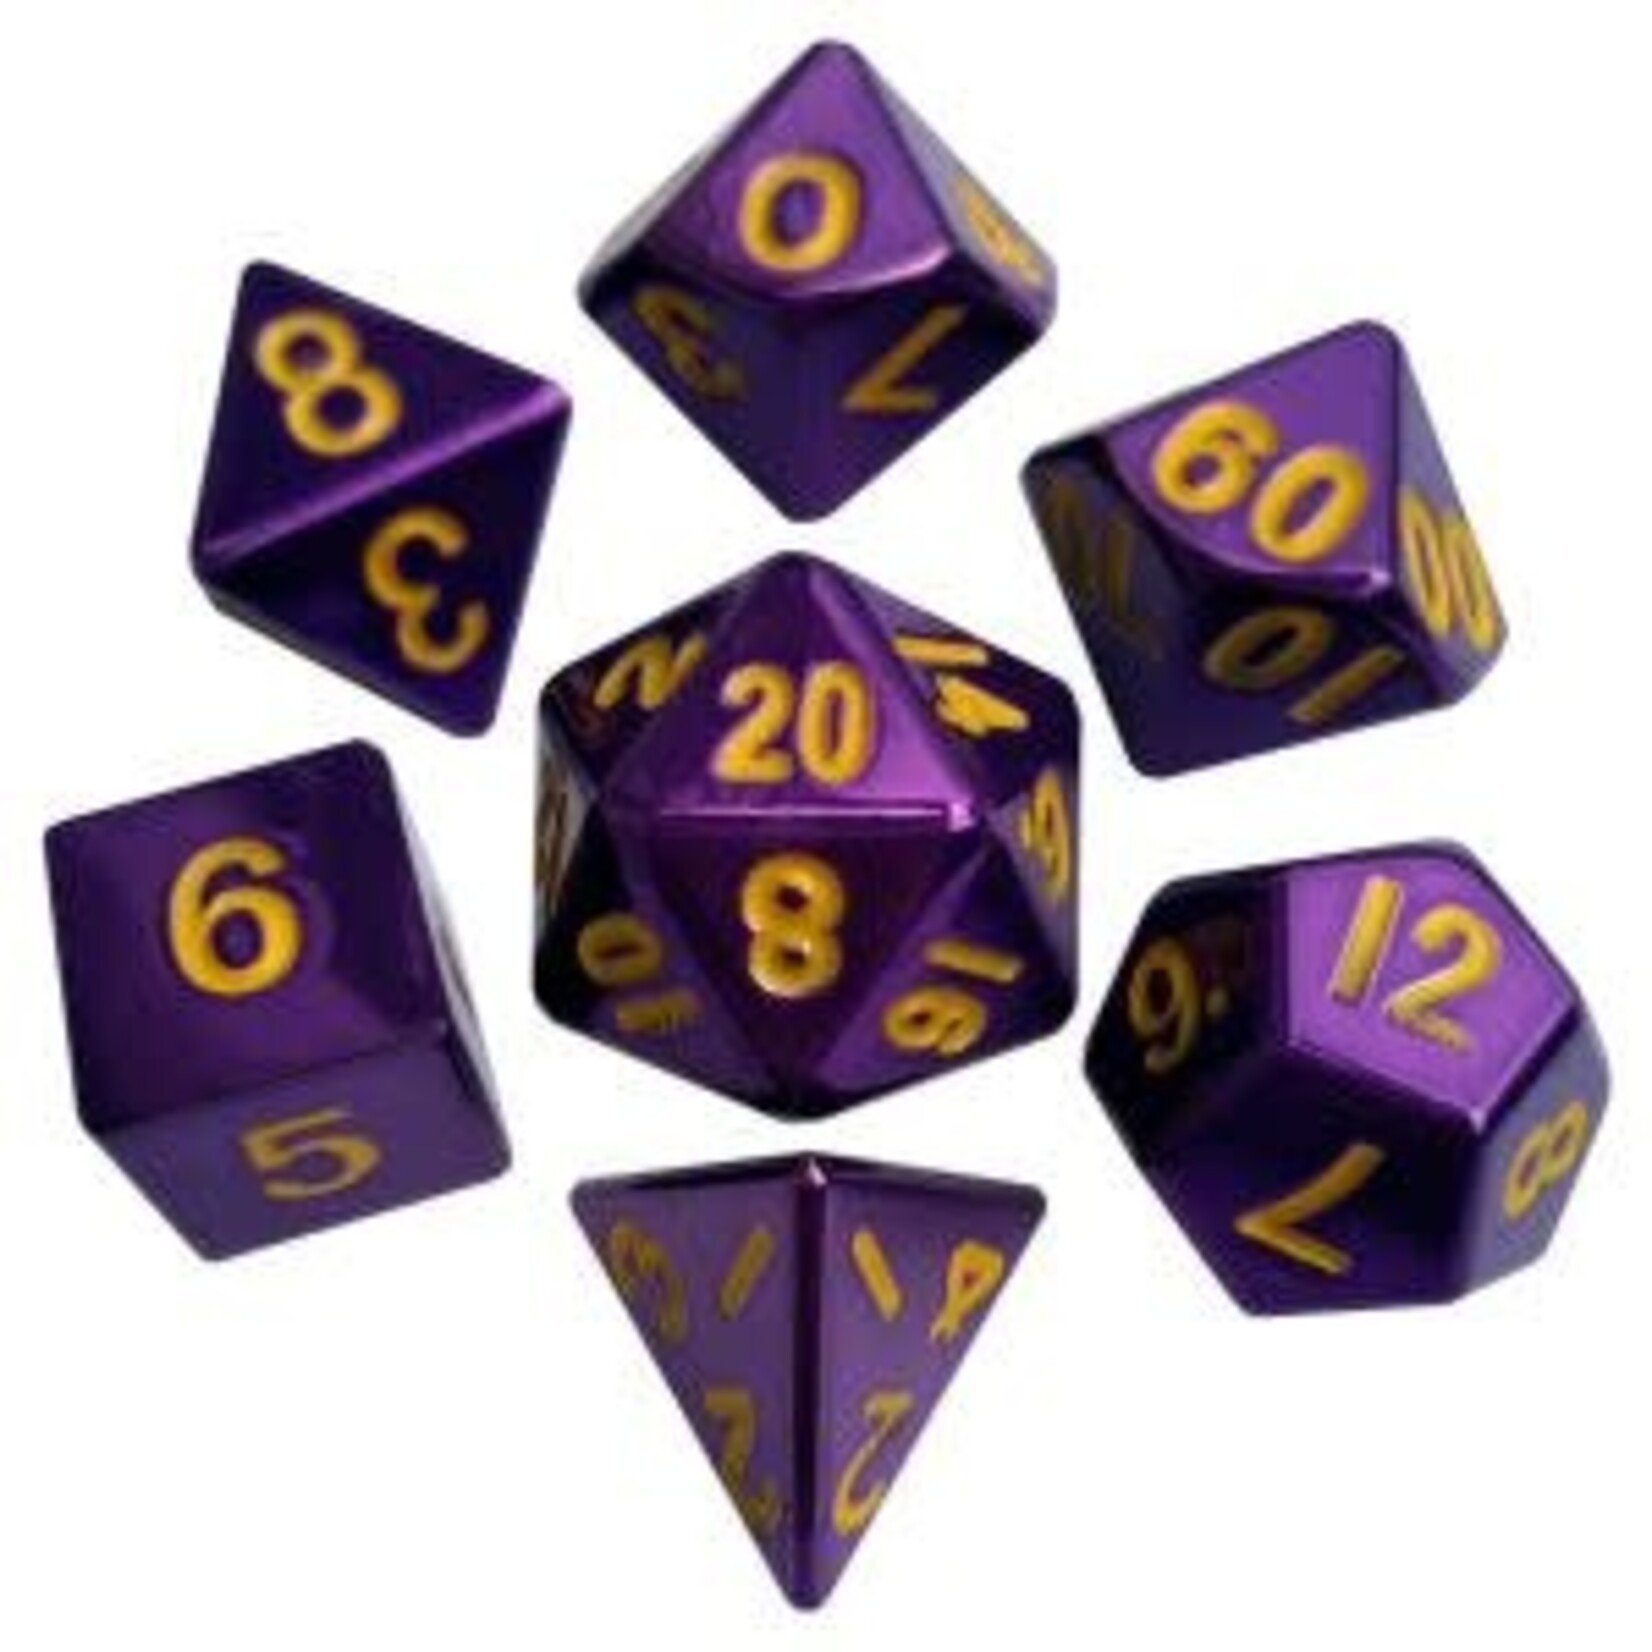 Metallic Dice Games MDG Poly Dice 16mm Metal Purple with Gold (7) Set